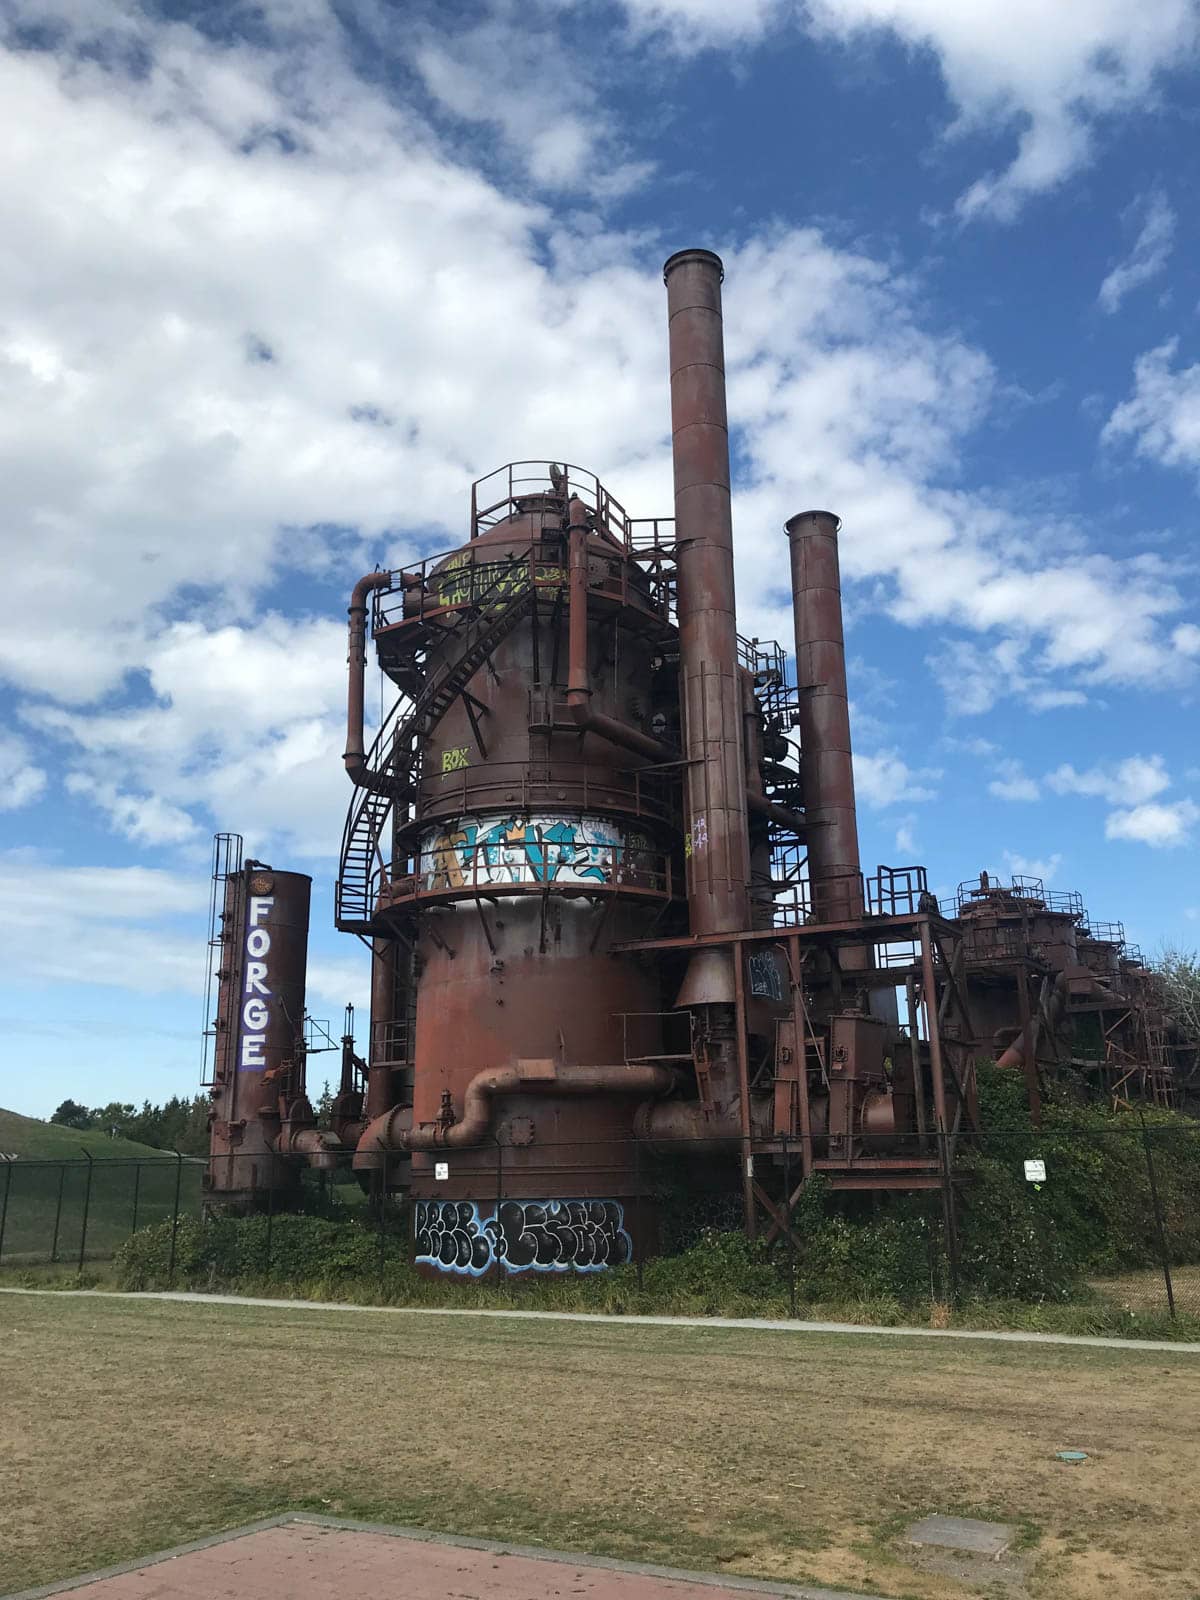 A large copper-brown-coloured structure, part of a coal plant with pipes and ladders. Some graffiti is on the structure. The sky is blue with some clouds.